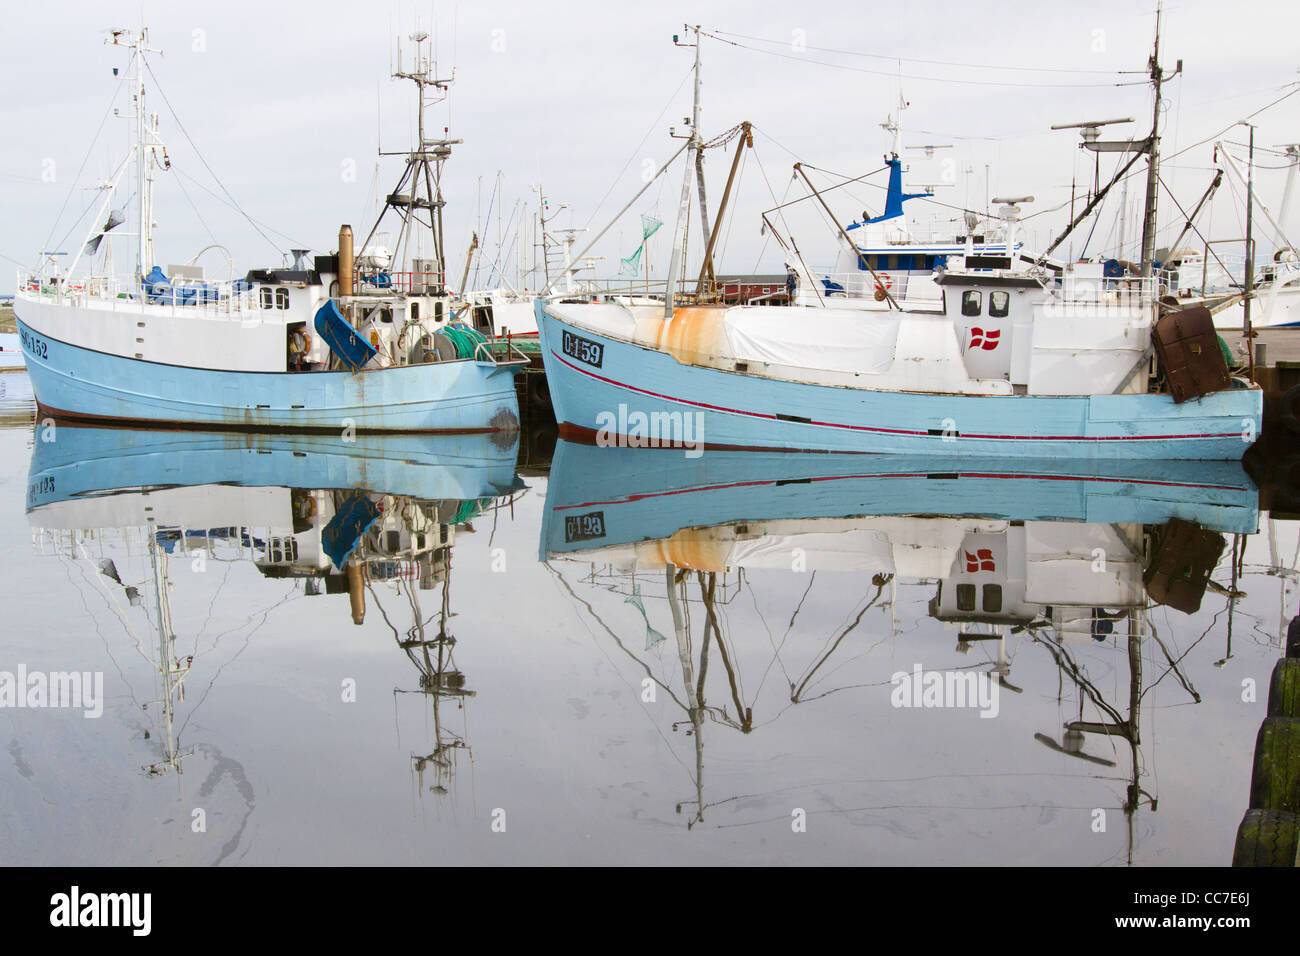 Fishing Boats, and their Reflections, in Harbour, Gilleleje, Sjaelland, Denmark Stock Photo